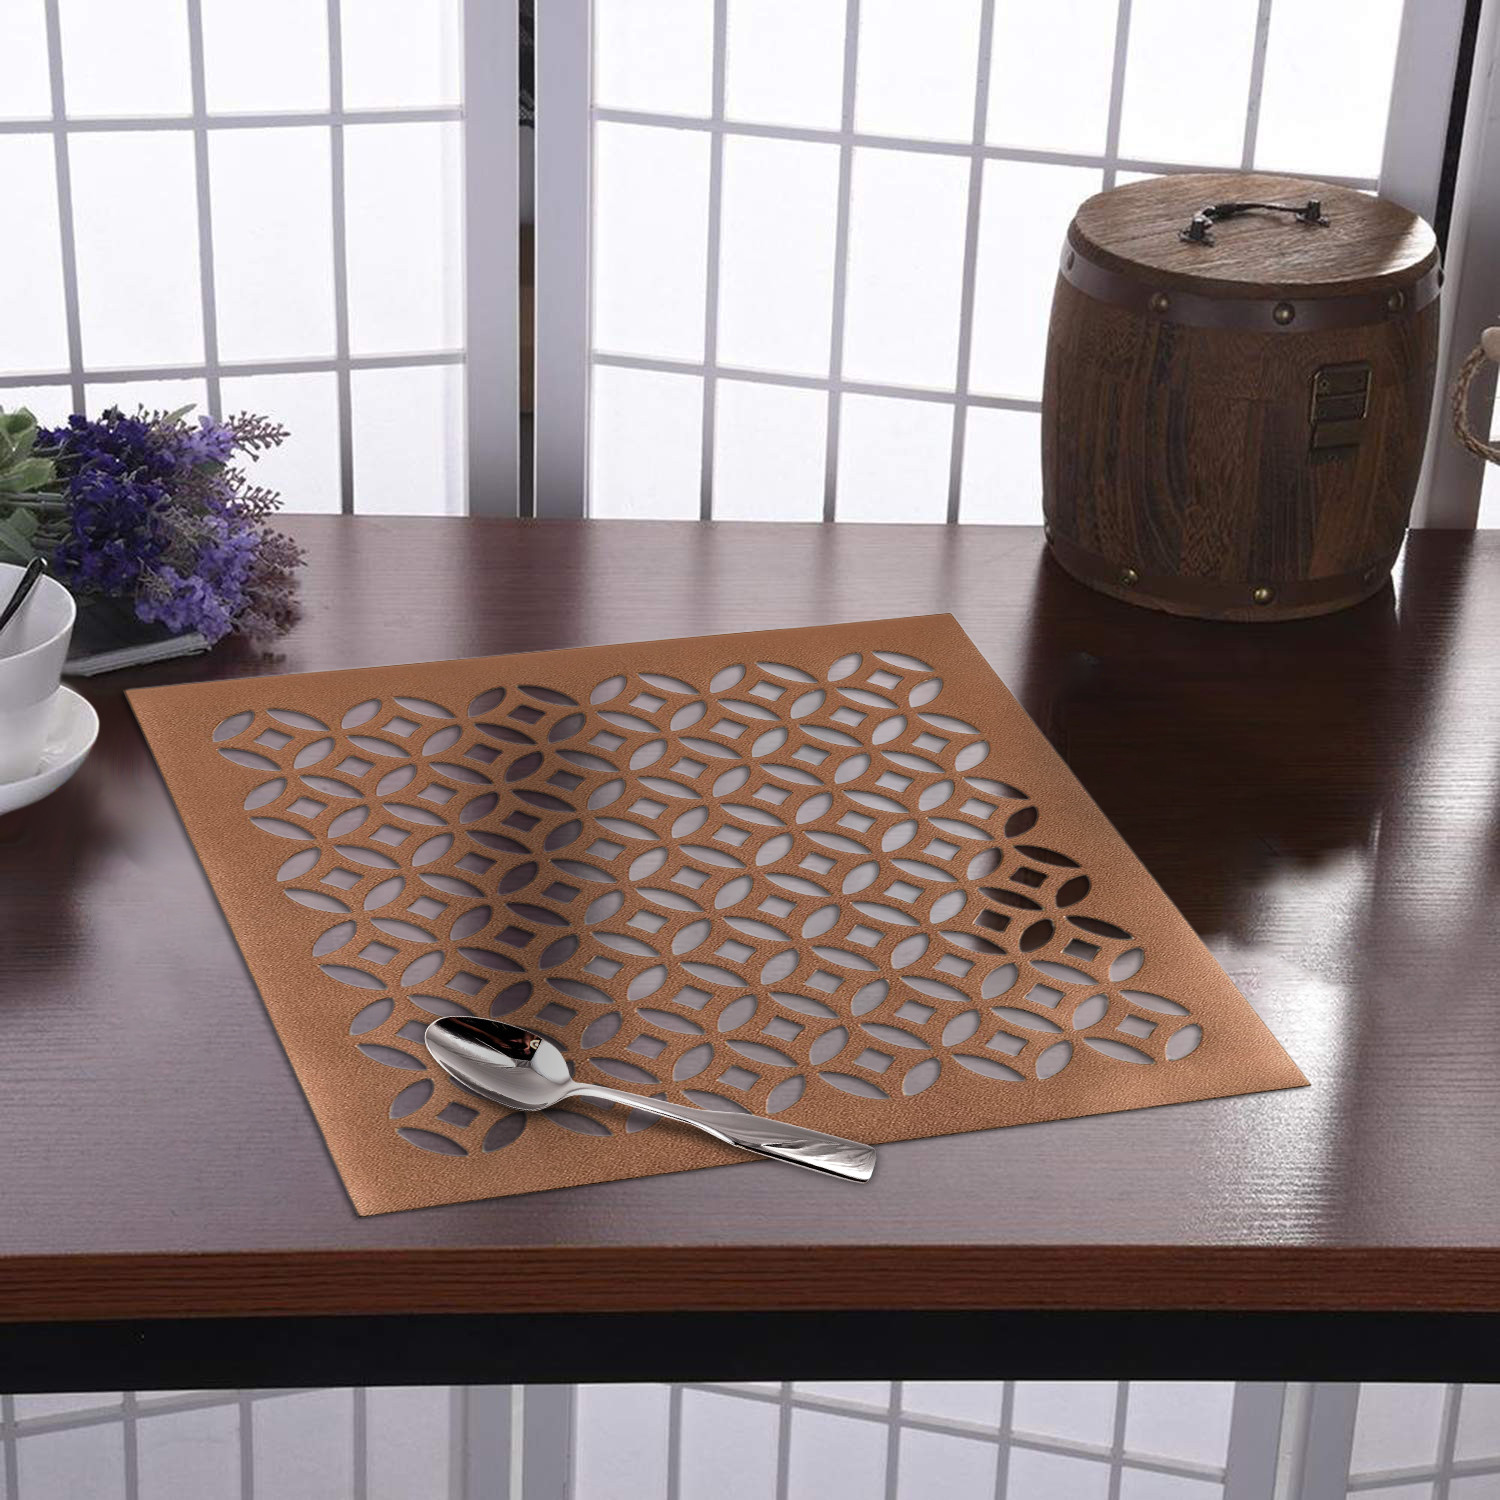 Kuber Industries Multiuses Arccircle Design PVC Squere Placemat for kitchen, Dining Table Set of 6 (Copper)